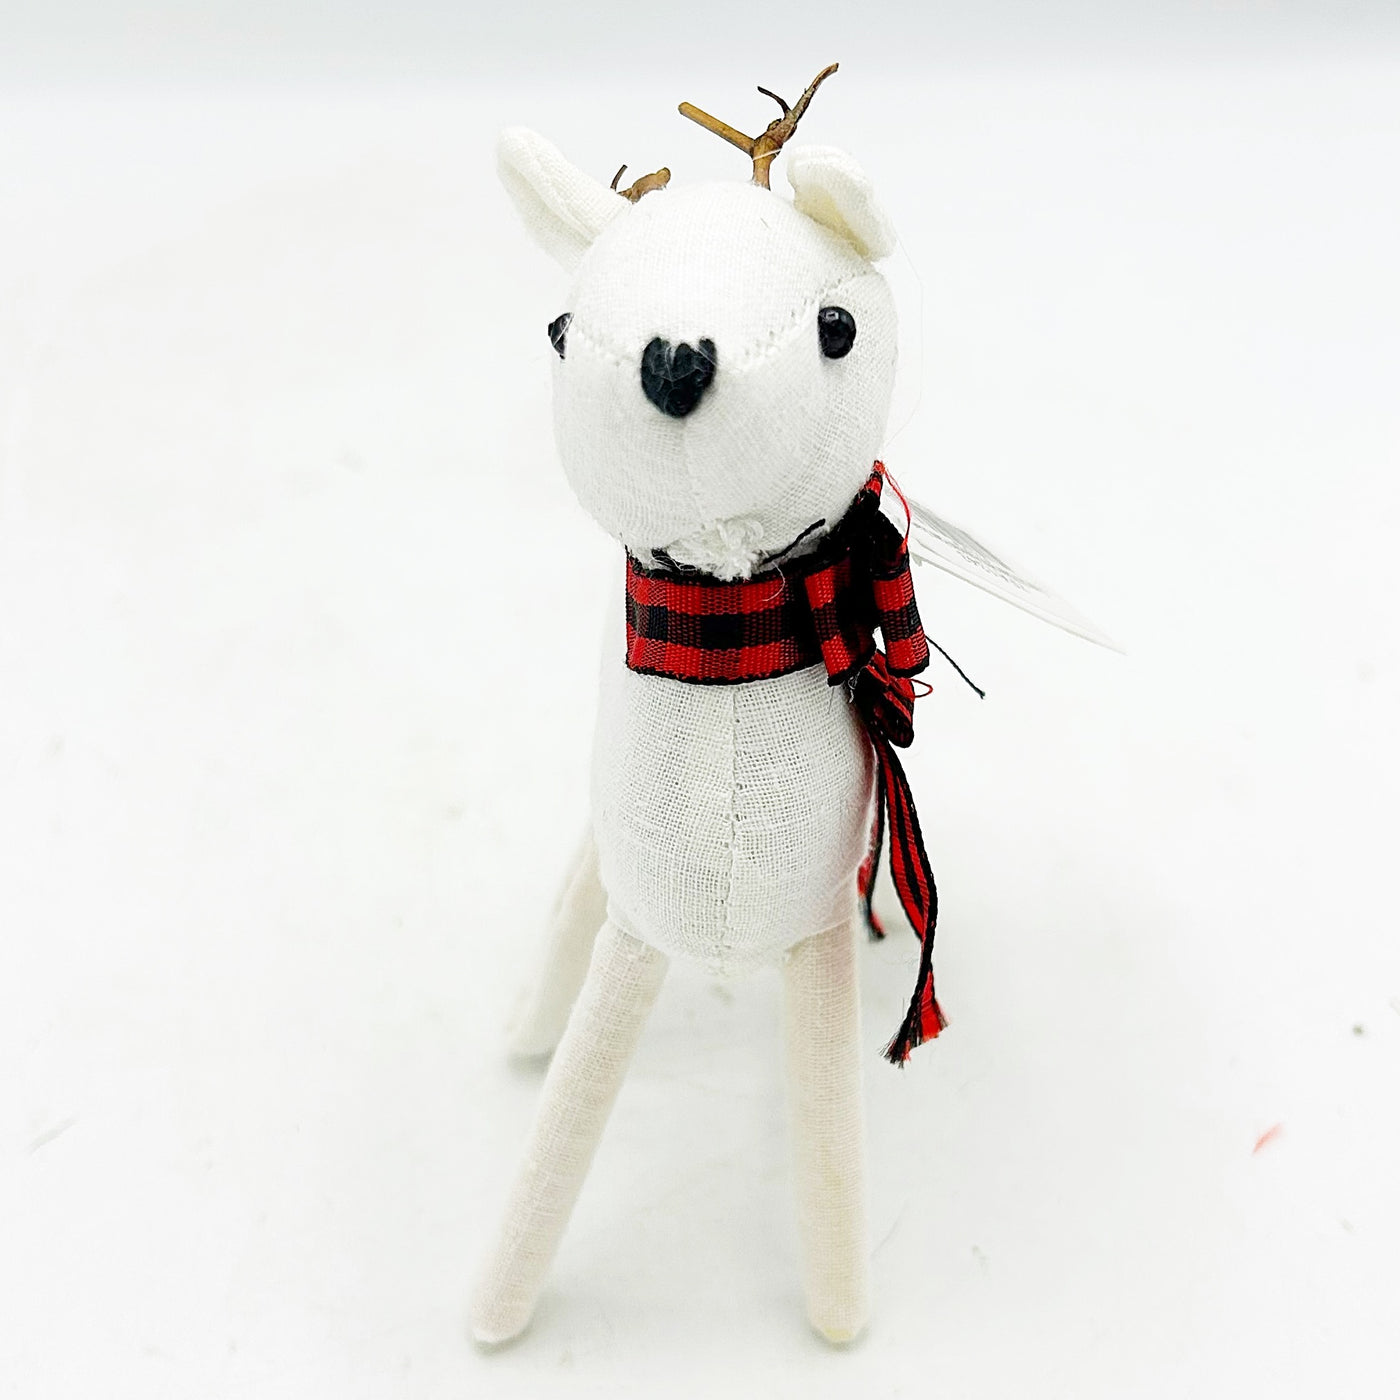 Little Deer With Christmas Red and Black Plaid Scarf Fabric Figure